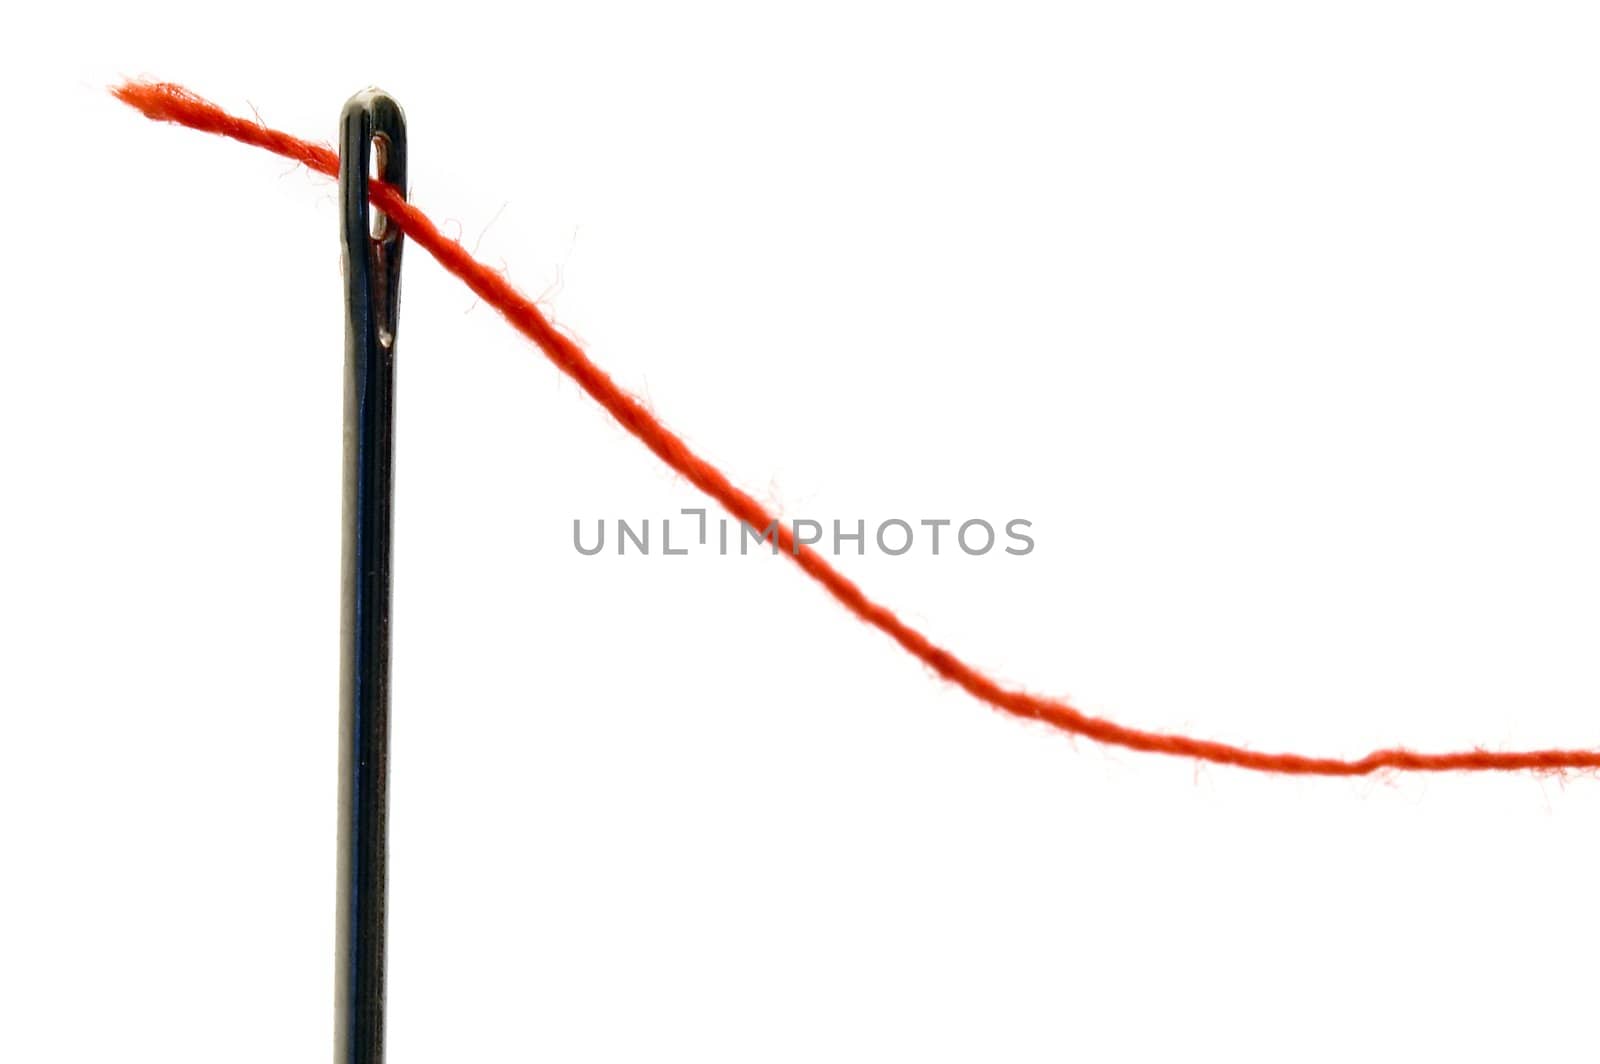 needle and red fibre isolated on white background